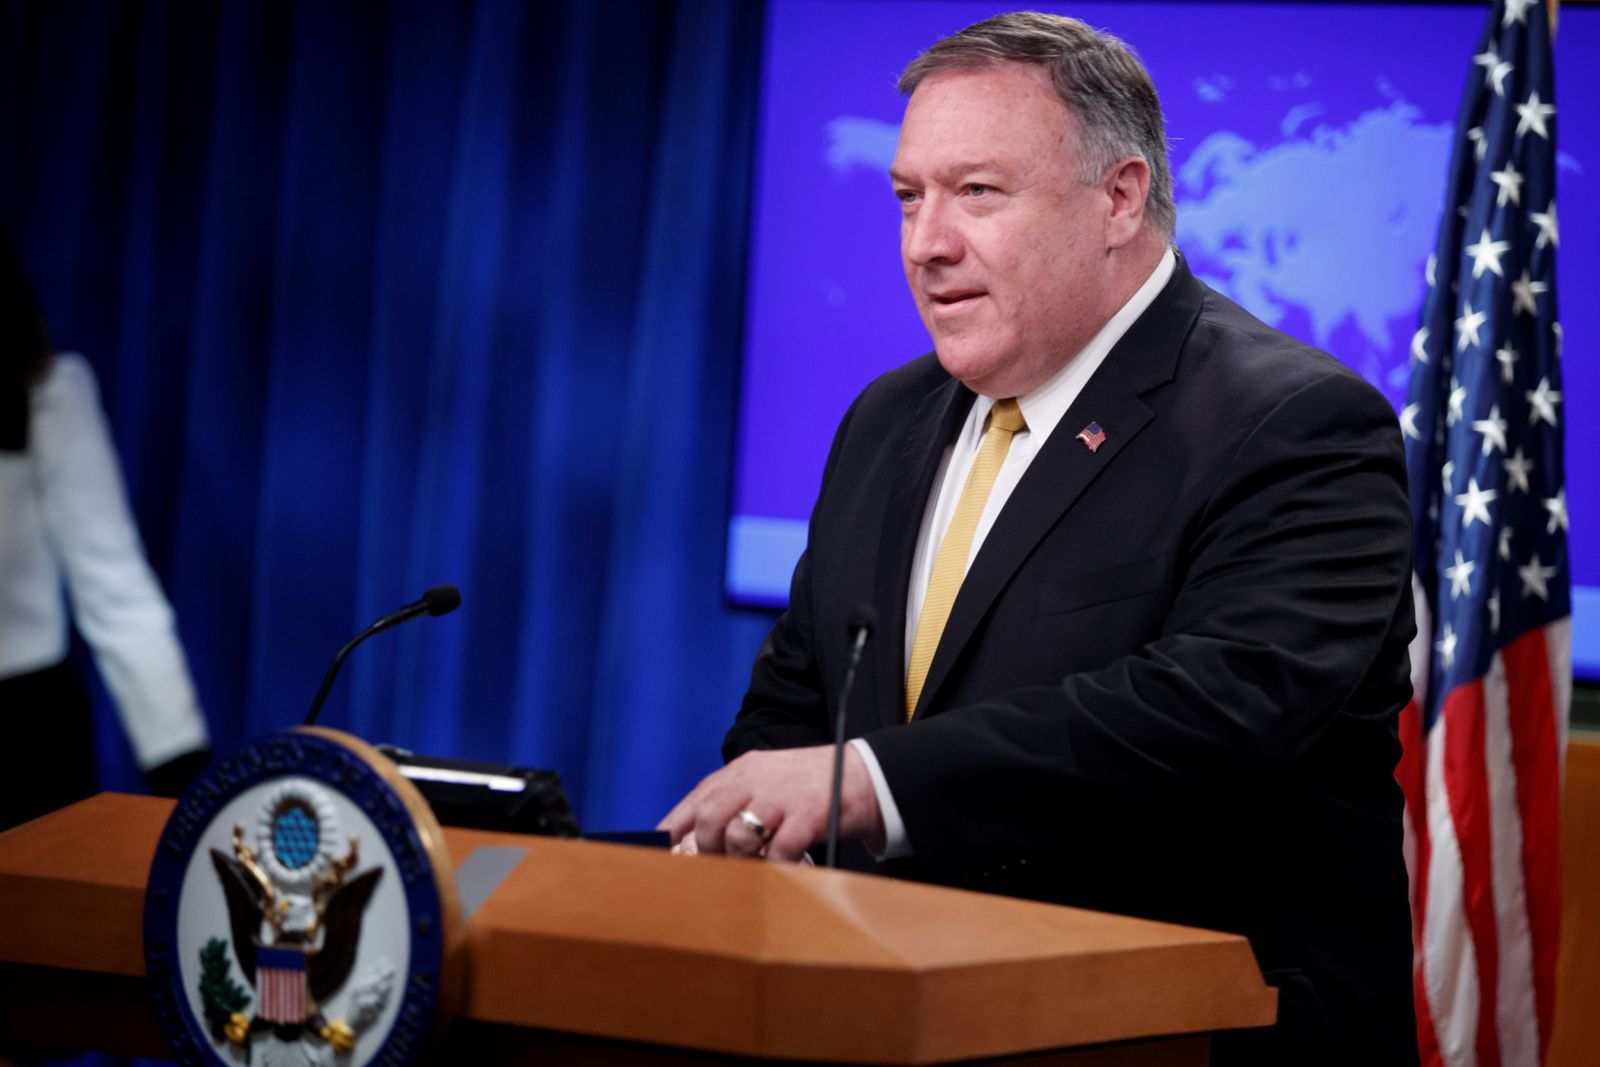 Pompeo’s Commission on Unalienable Rights